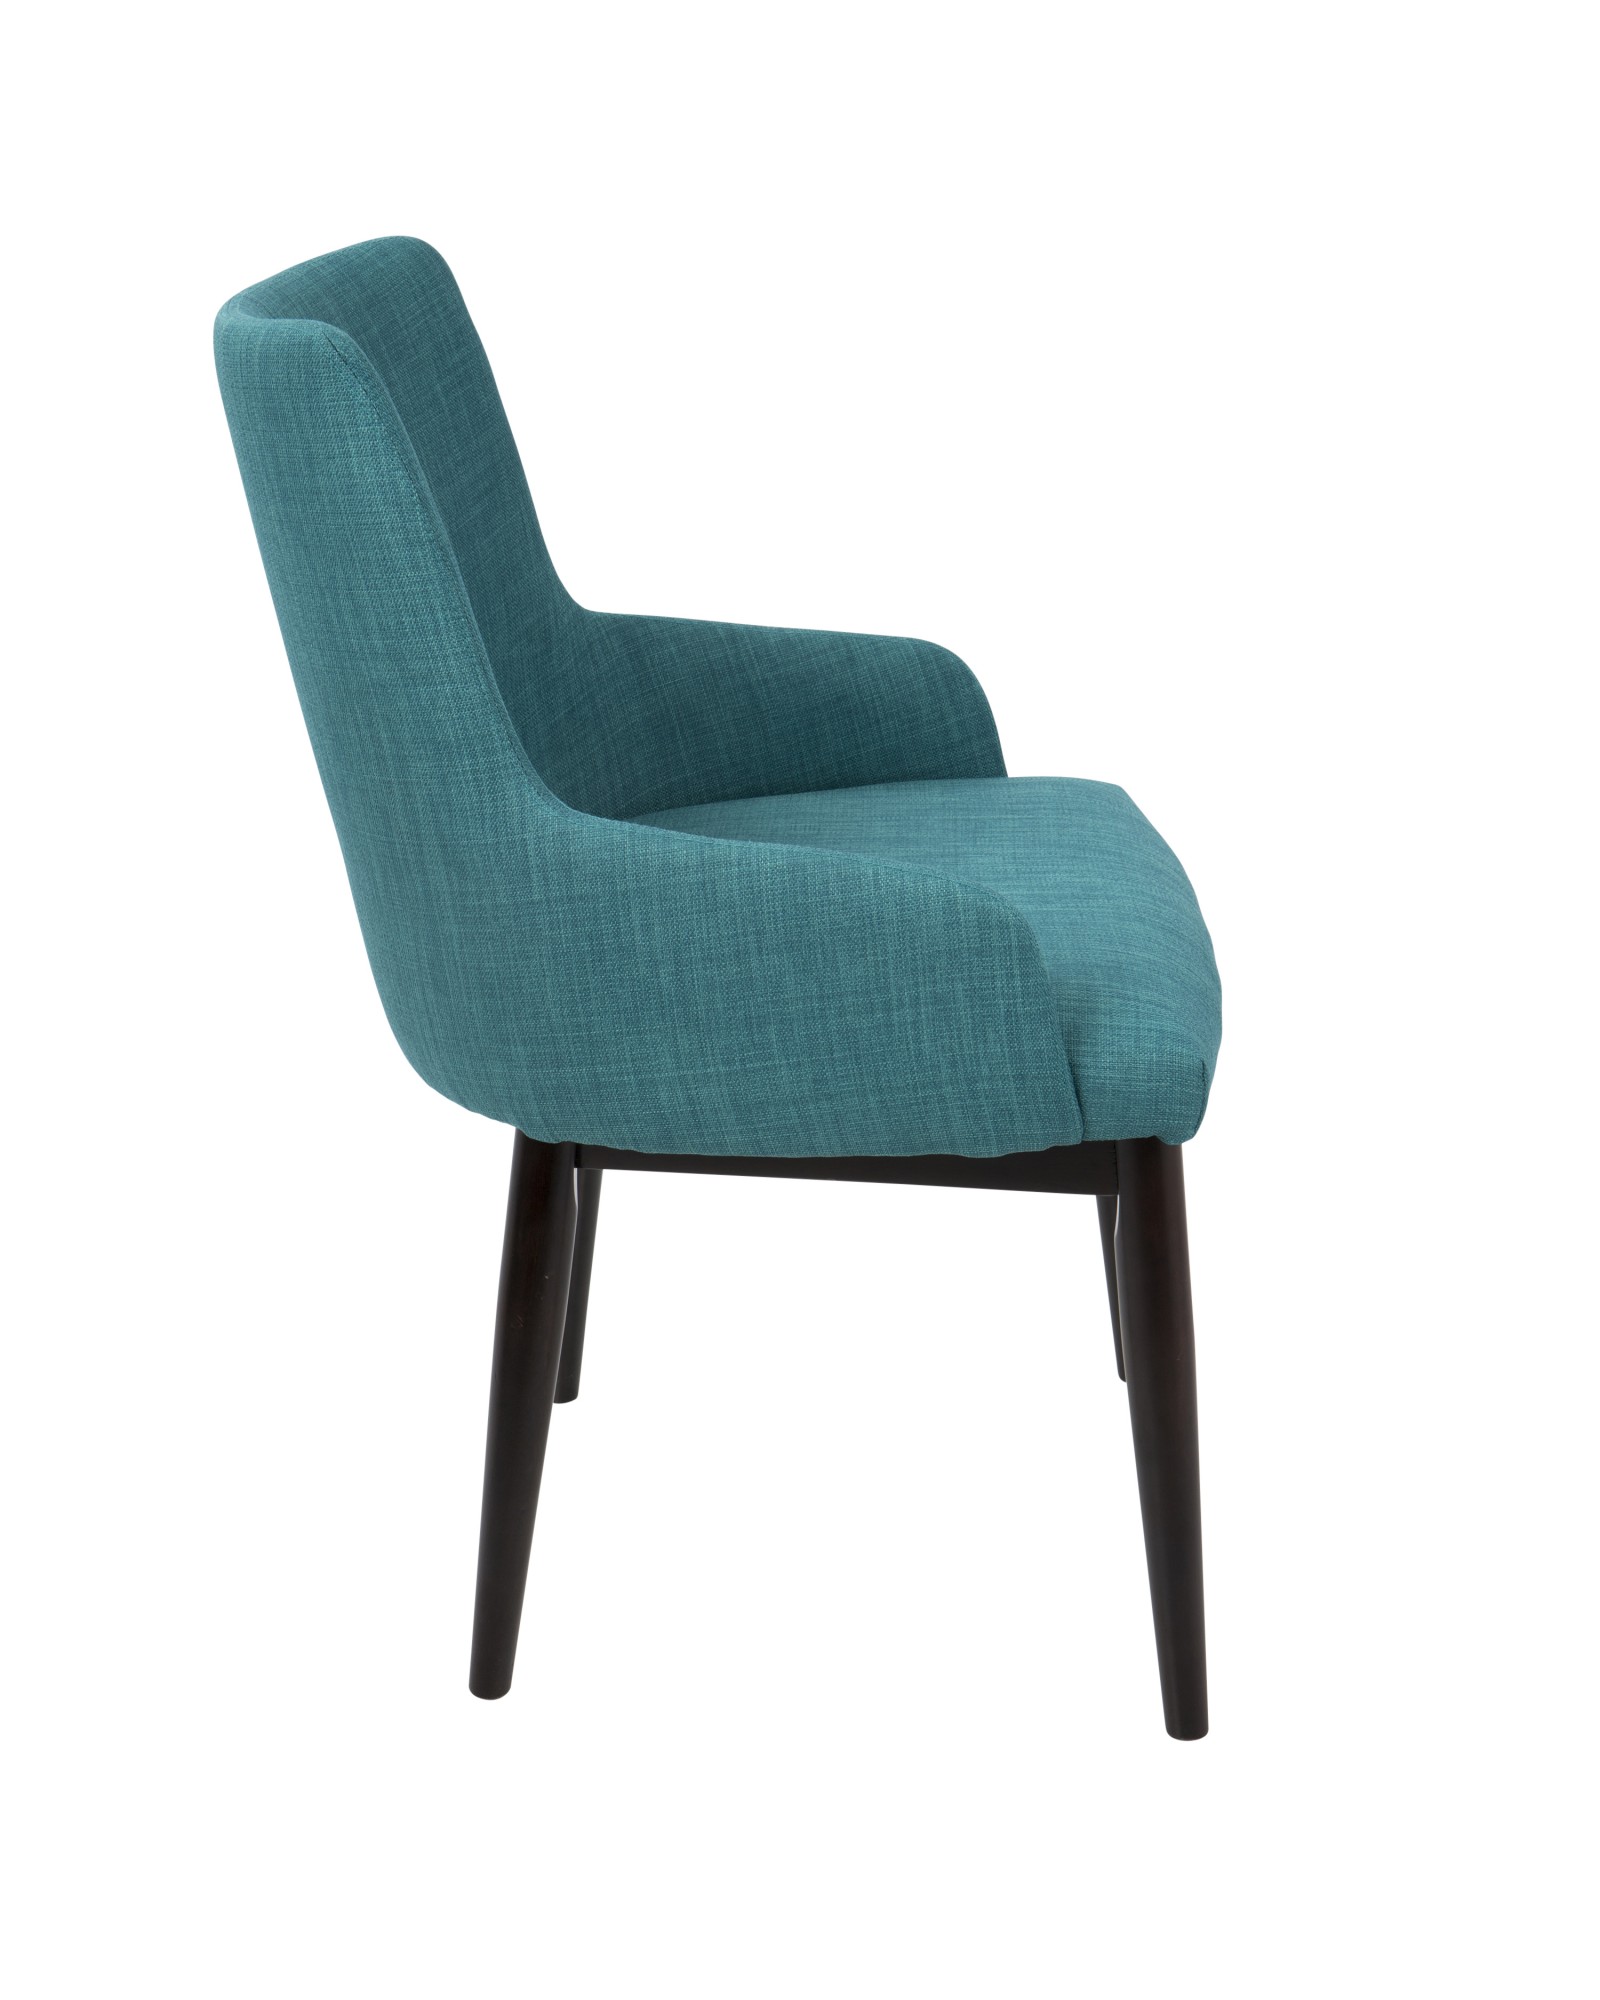 Santiago Mid-Century Modern Dining/Accent Chair in Walnut with Teal Fabric - Set of 2